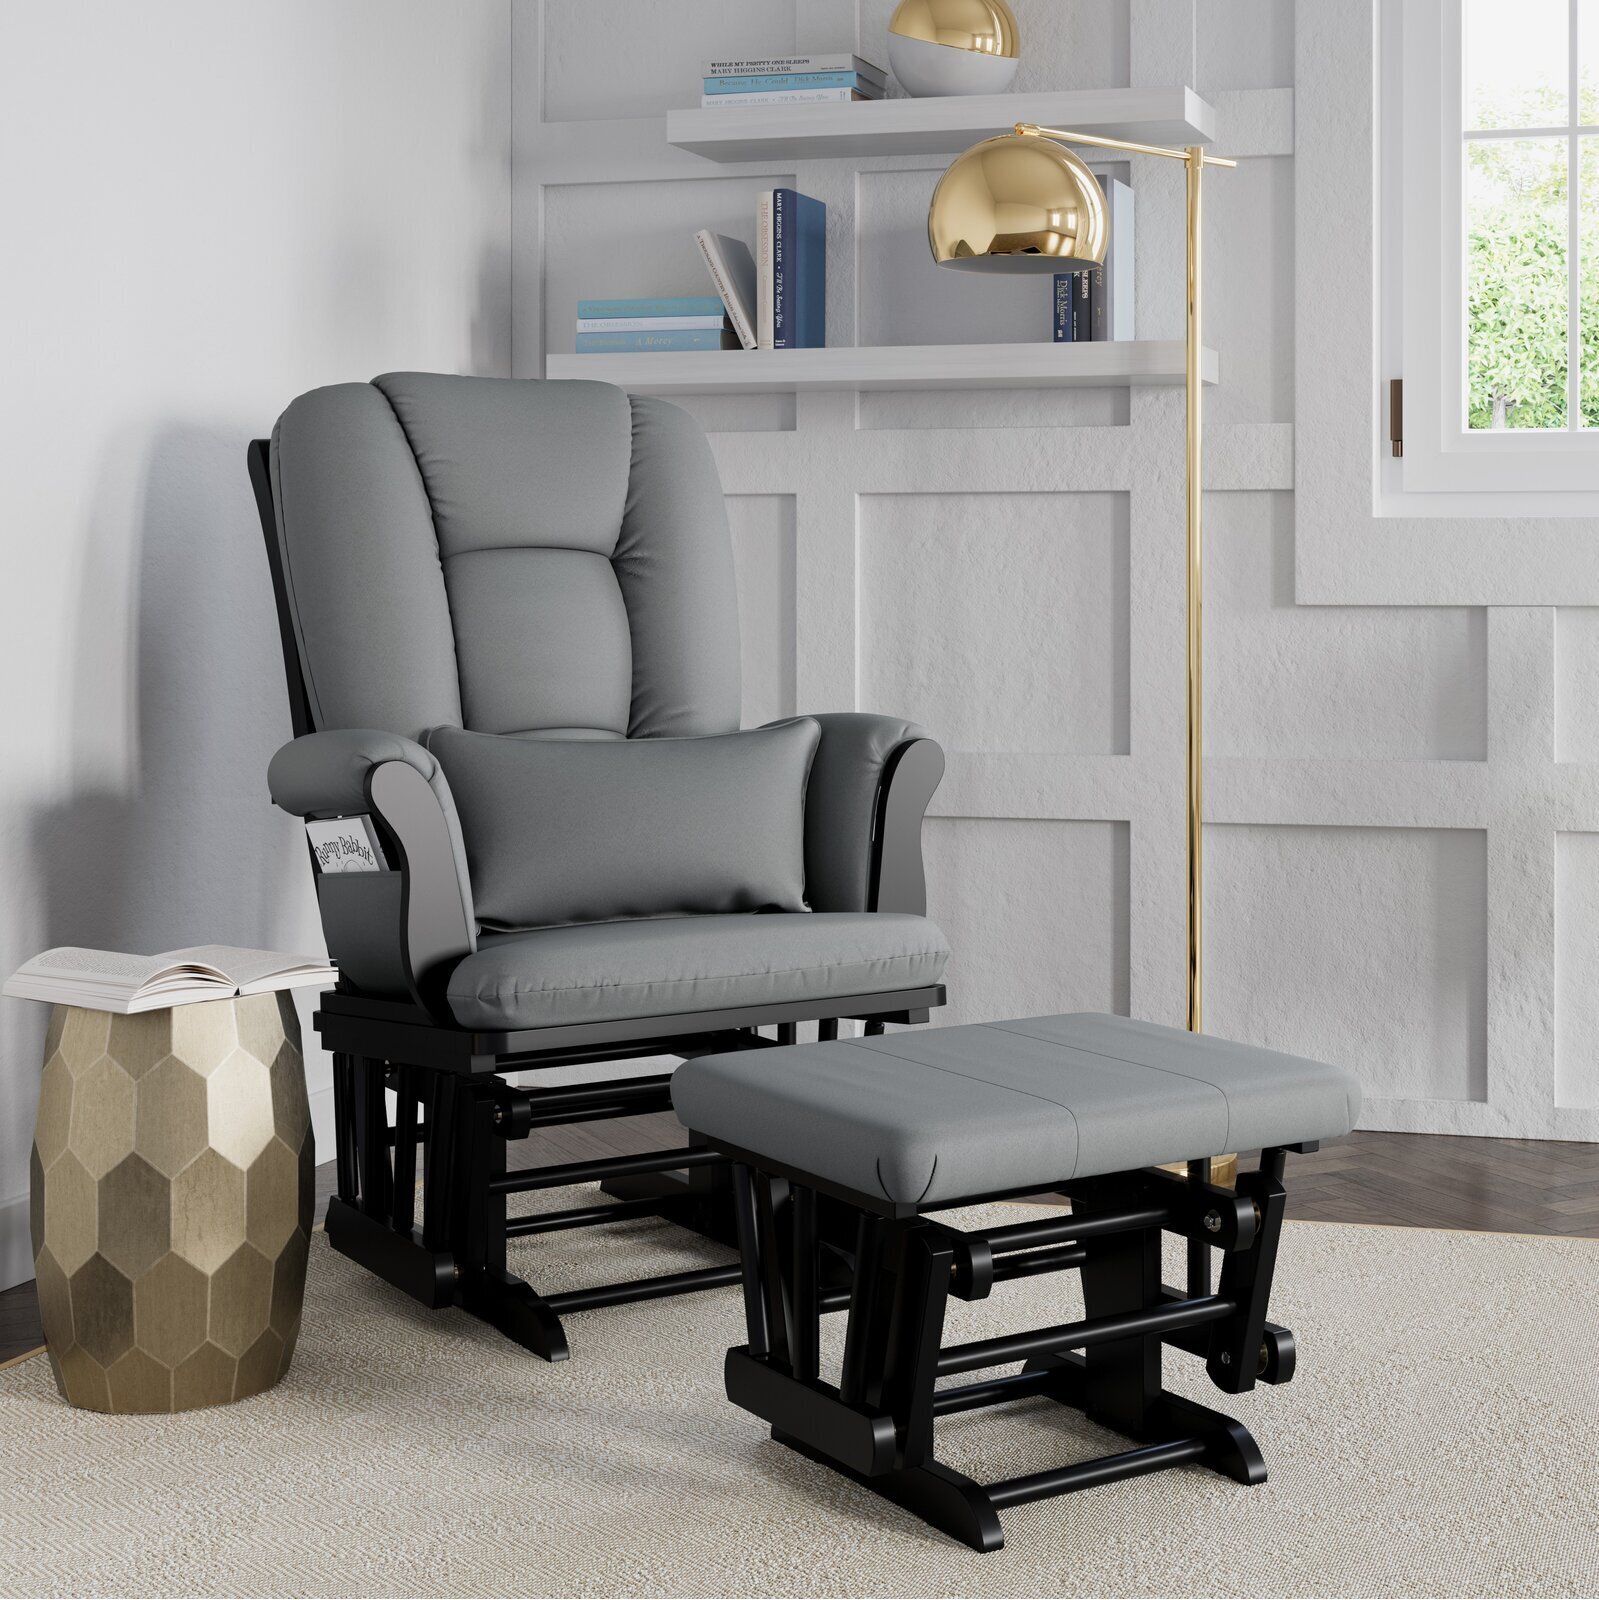 Padded Wooden Glider Chair with Ottoman